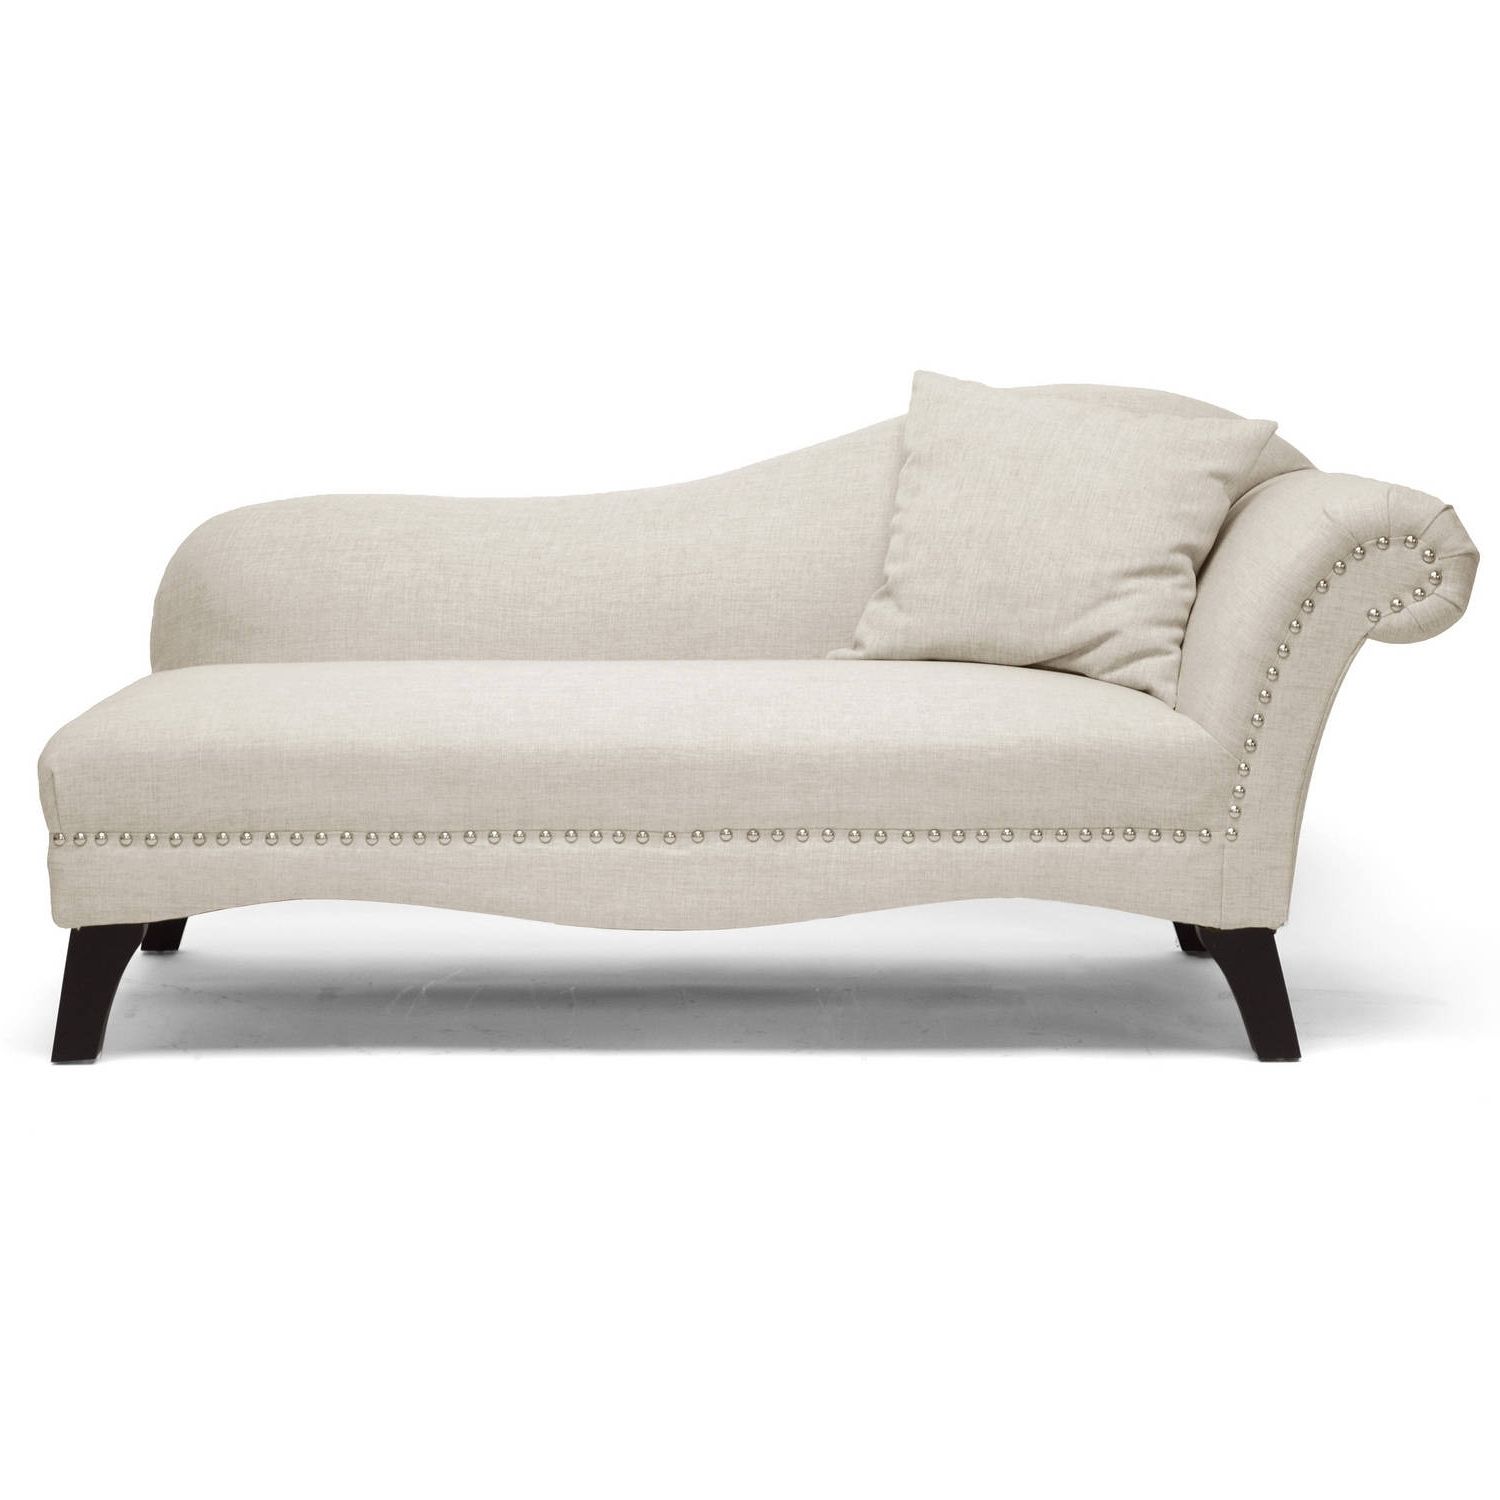 Tufted Chaise Lounge Chairs Regarding Most Current Chaise Lounges – Walmart (View 15 of 15)